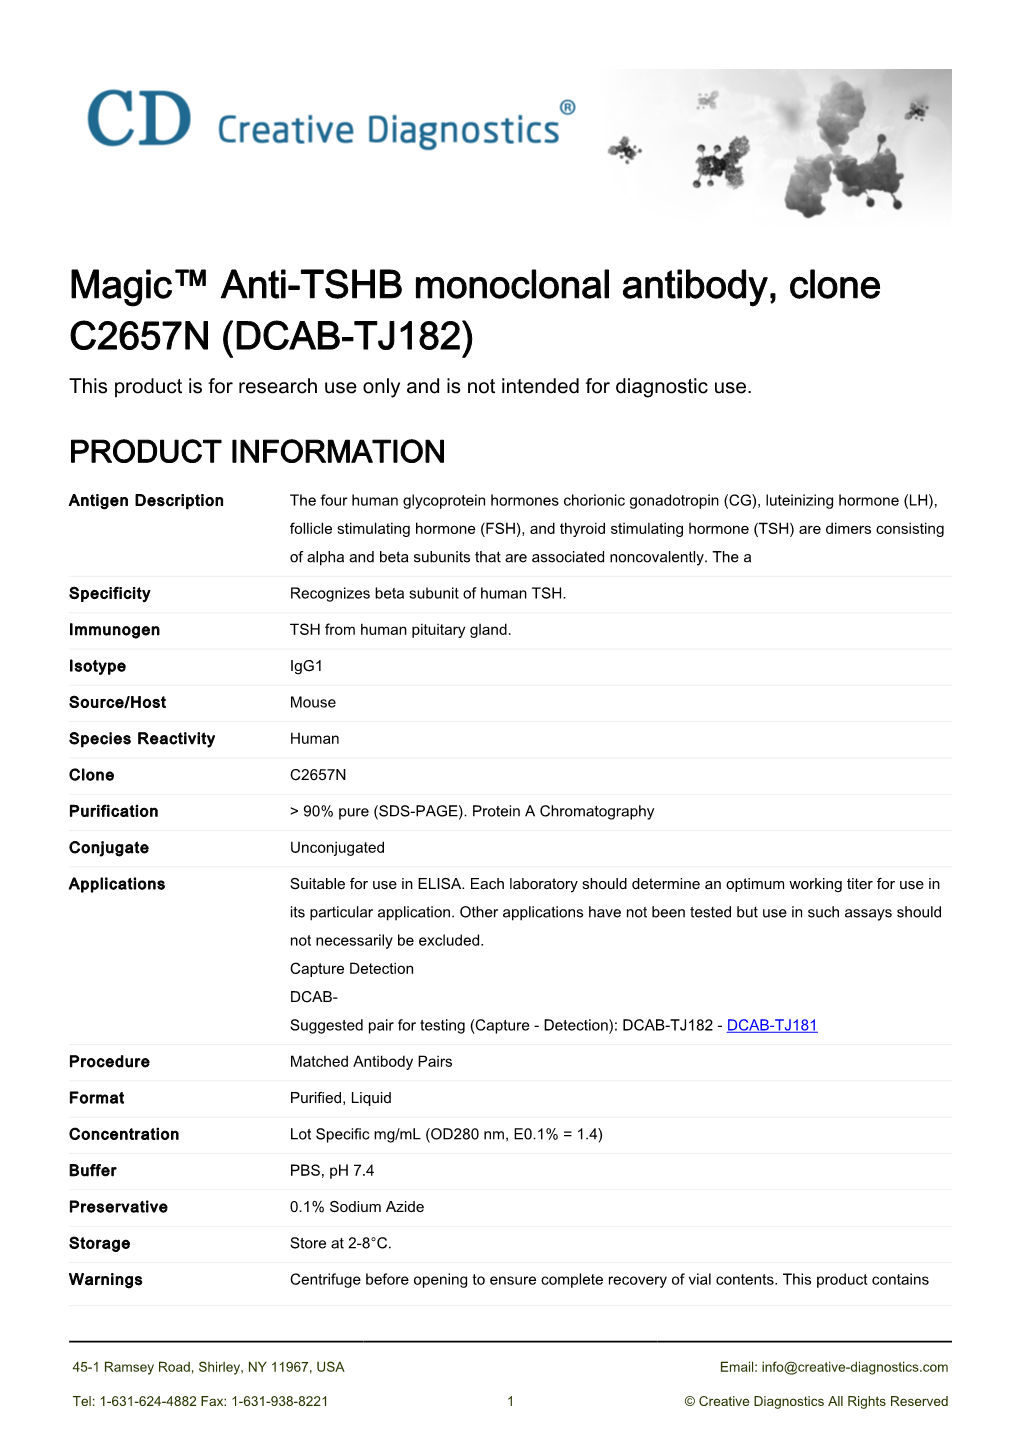 Magic™ Anti-TSHB Monoclonal Antibody, Clone C2657N (DCAB-TJ182) This Product Is for Research Use Only and Is Not Intended for Diagnostic Use